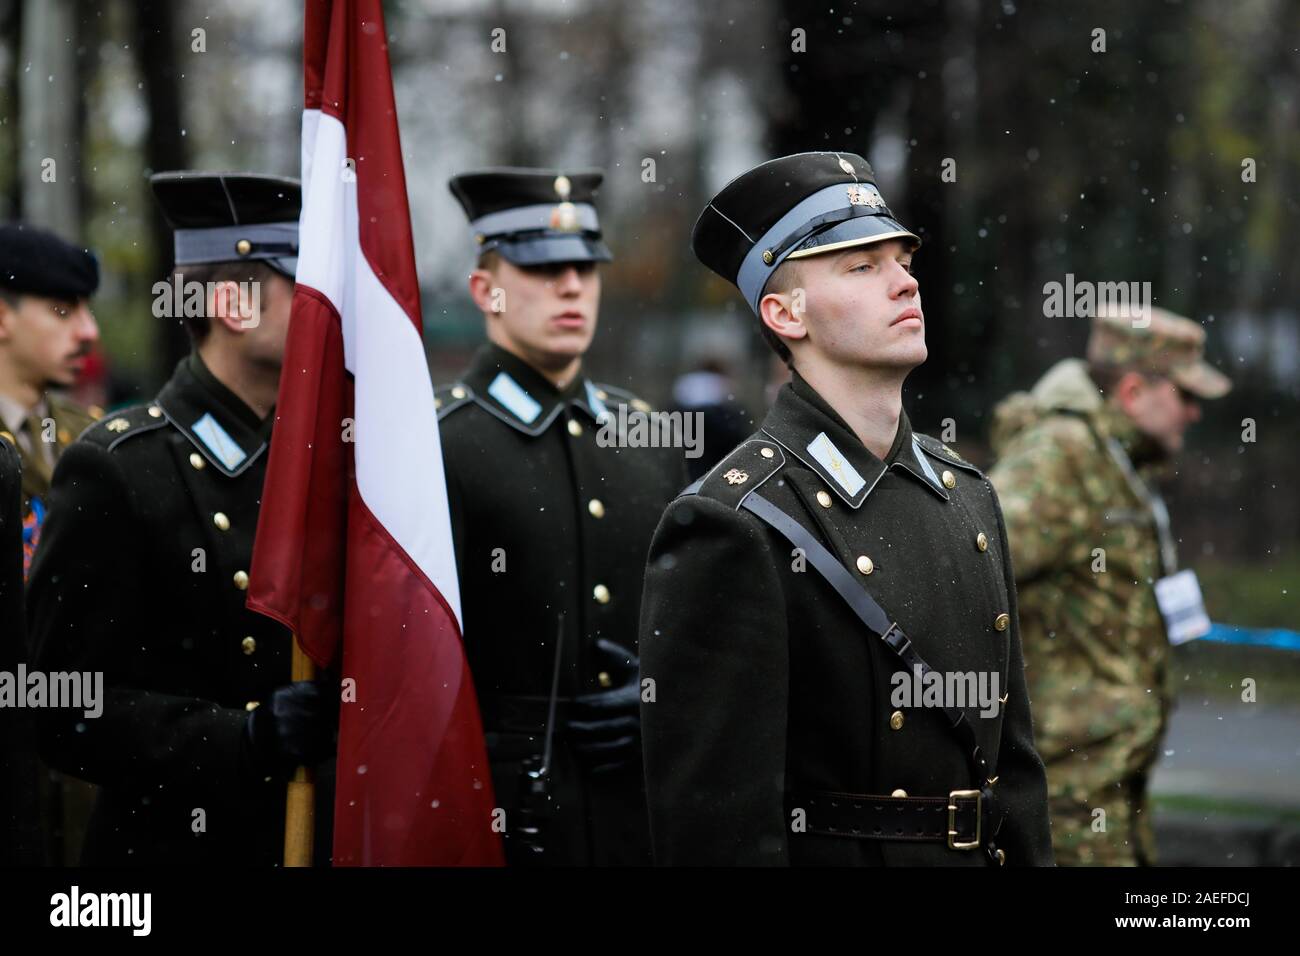 Bucharest, Romania - December 01, 2019: Latvian soldiers in ceremonial uniforms take part at the Romanian National Day military parade during a snowy Stock Photo